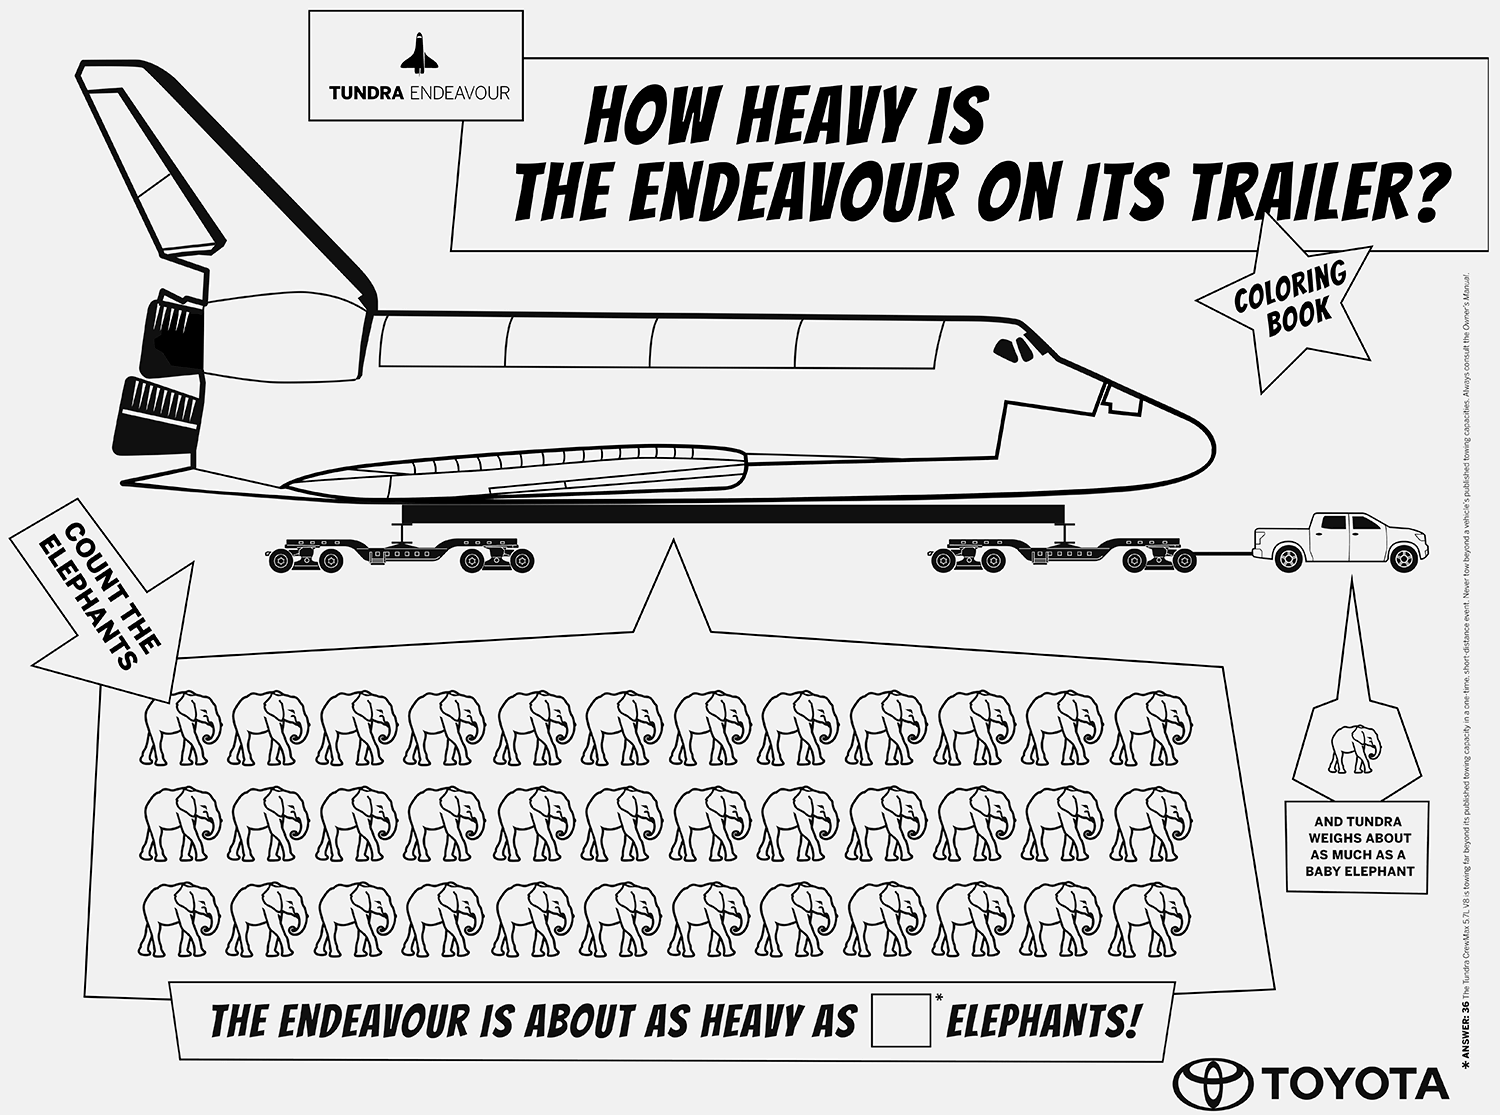 NineLives Group Tundra Endeavour Heavy